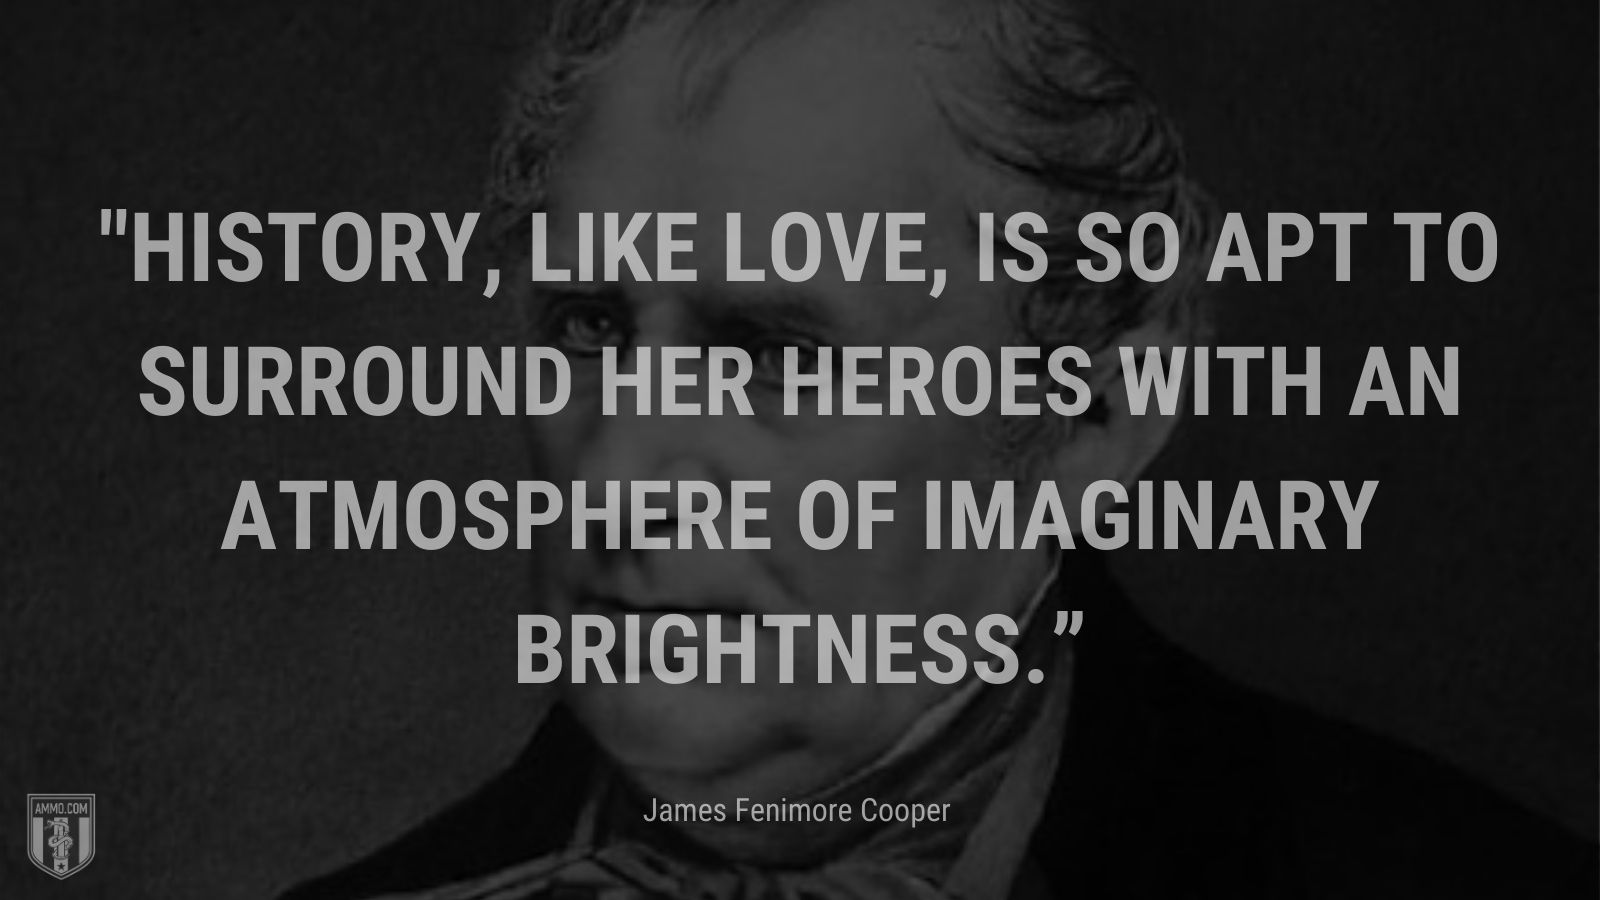 “History, like love, is so apt to surround her heroes with an atmosphere of imaginary brightness.” - James Fenimore Cooper